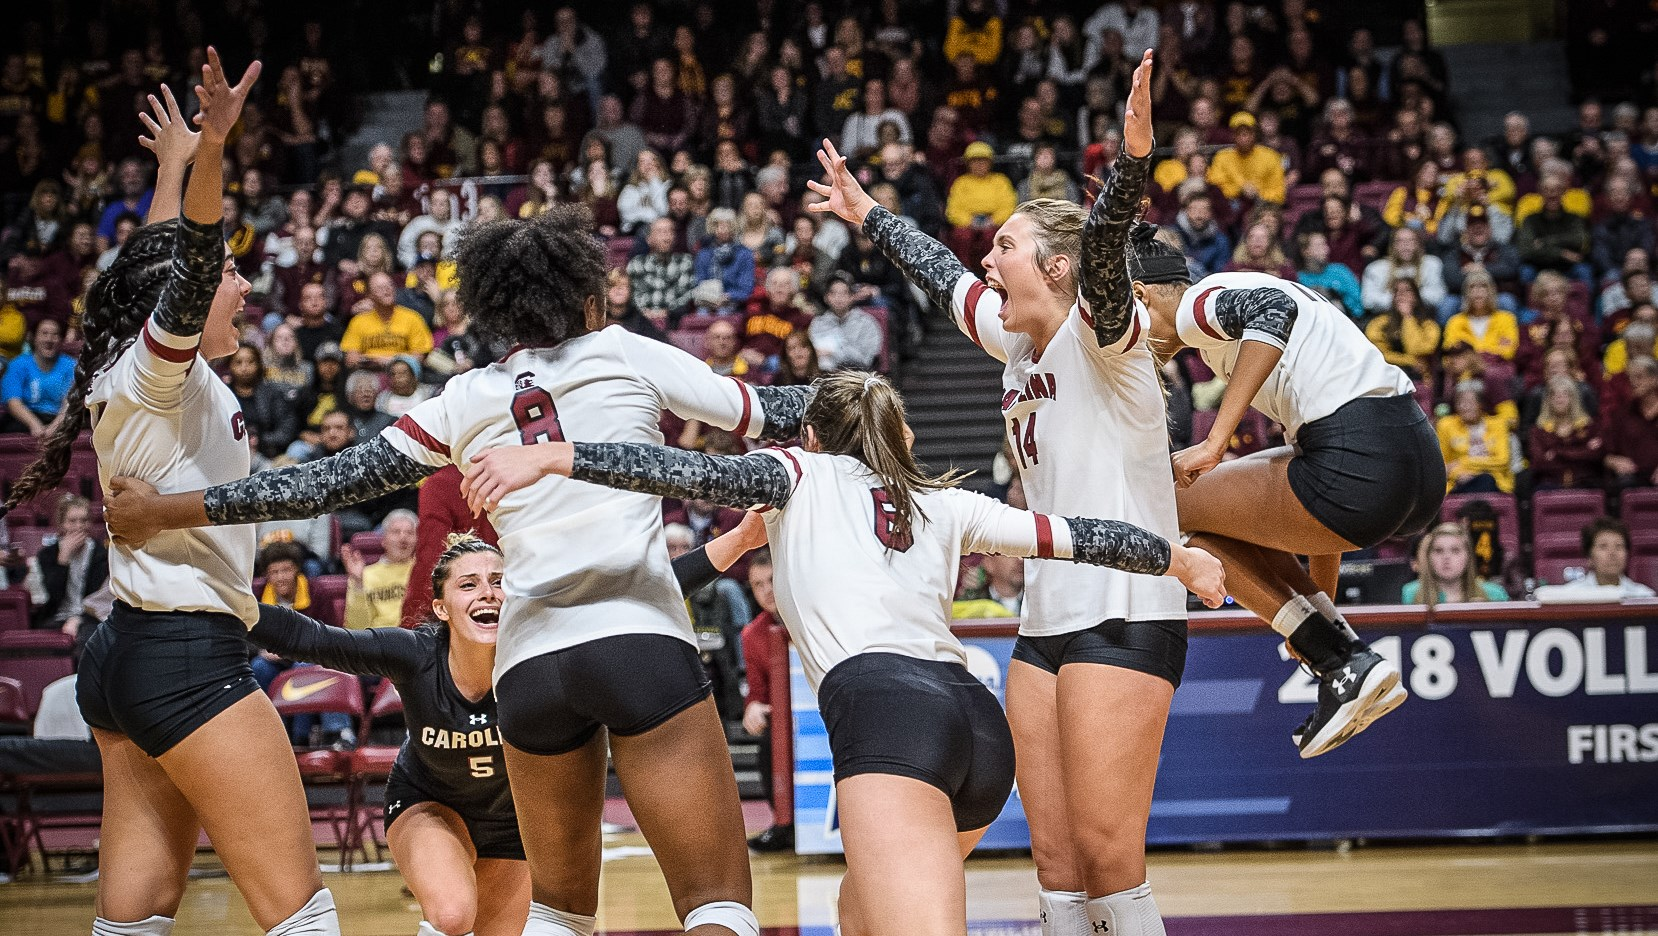 Gamecocks Survive and Advance; Defeat Colorado in Five to Open Postseason Play